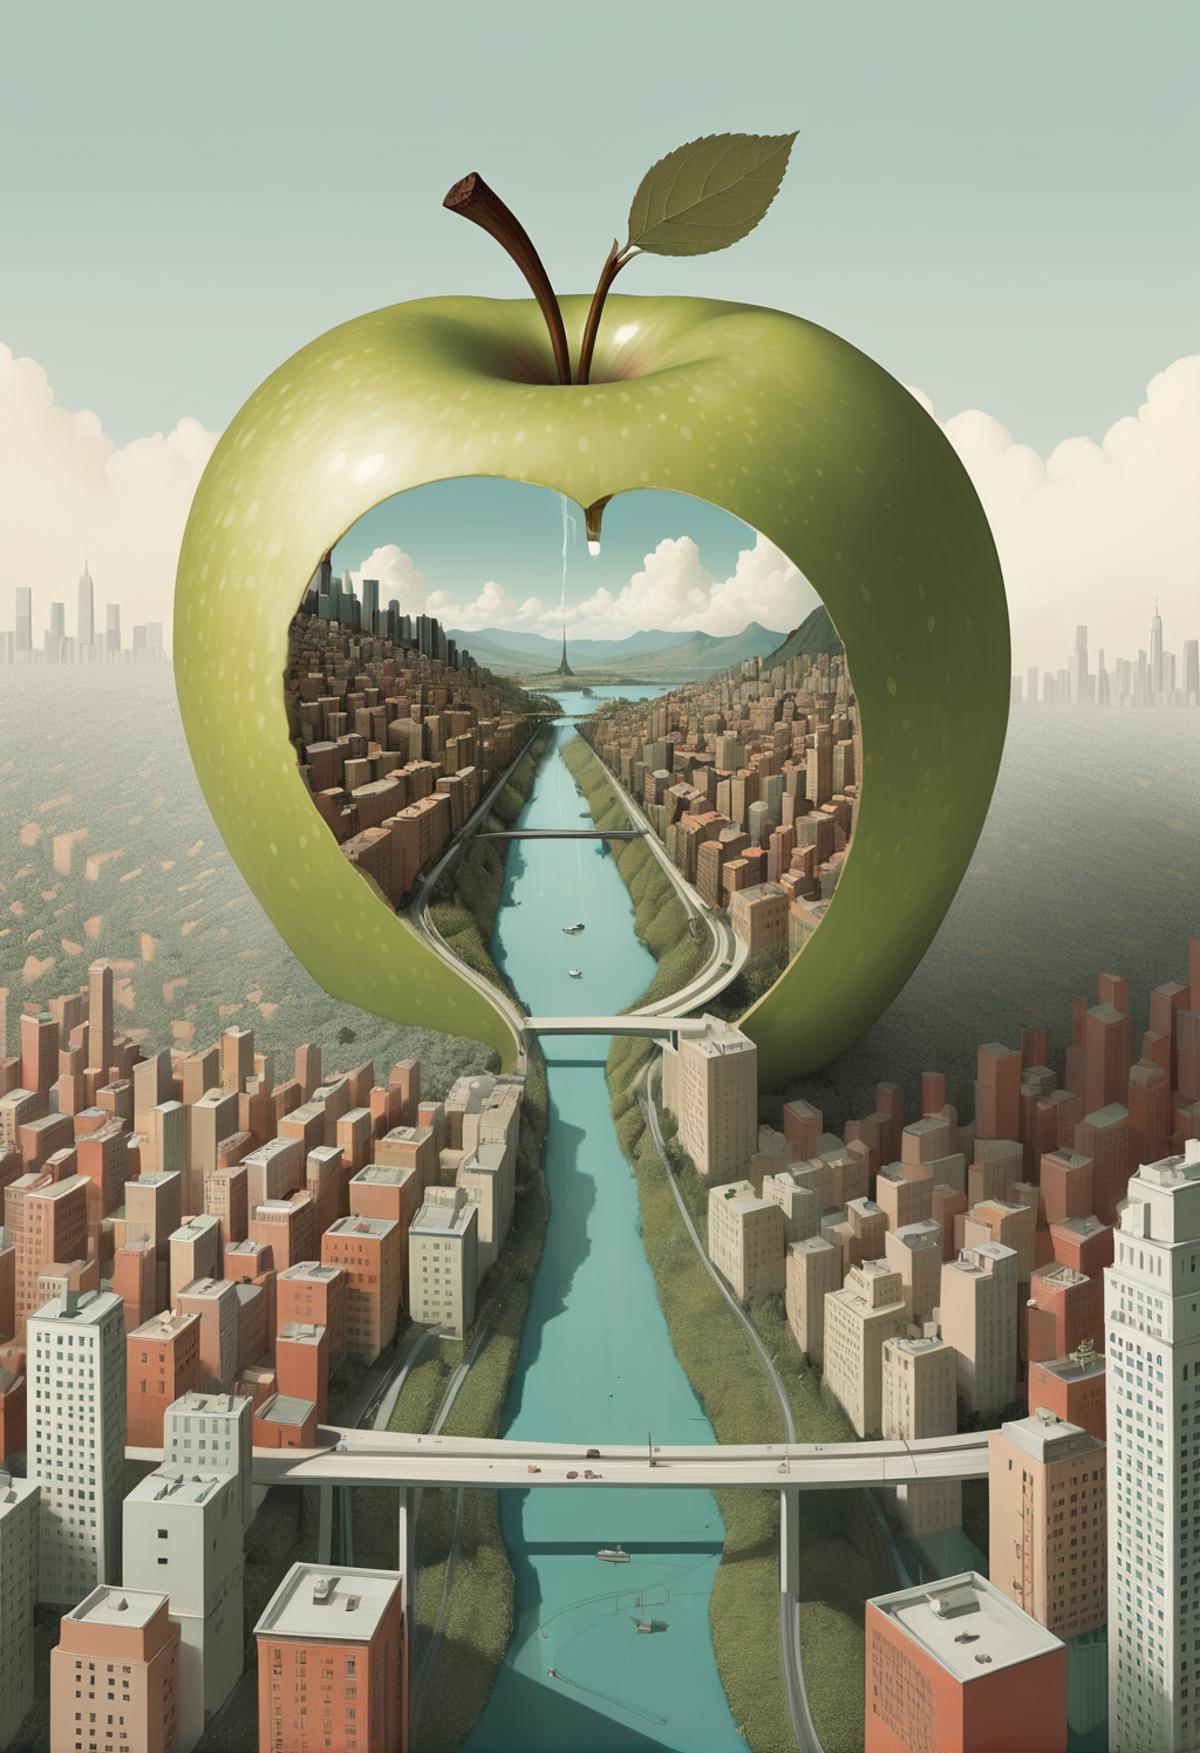 A large green apple with a city scene inside it.